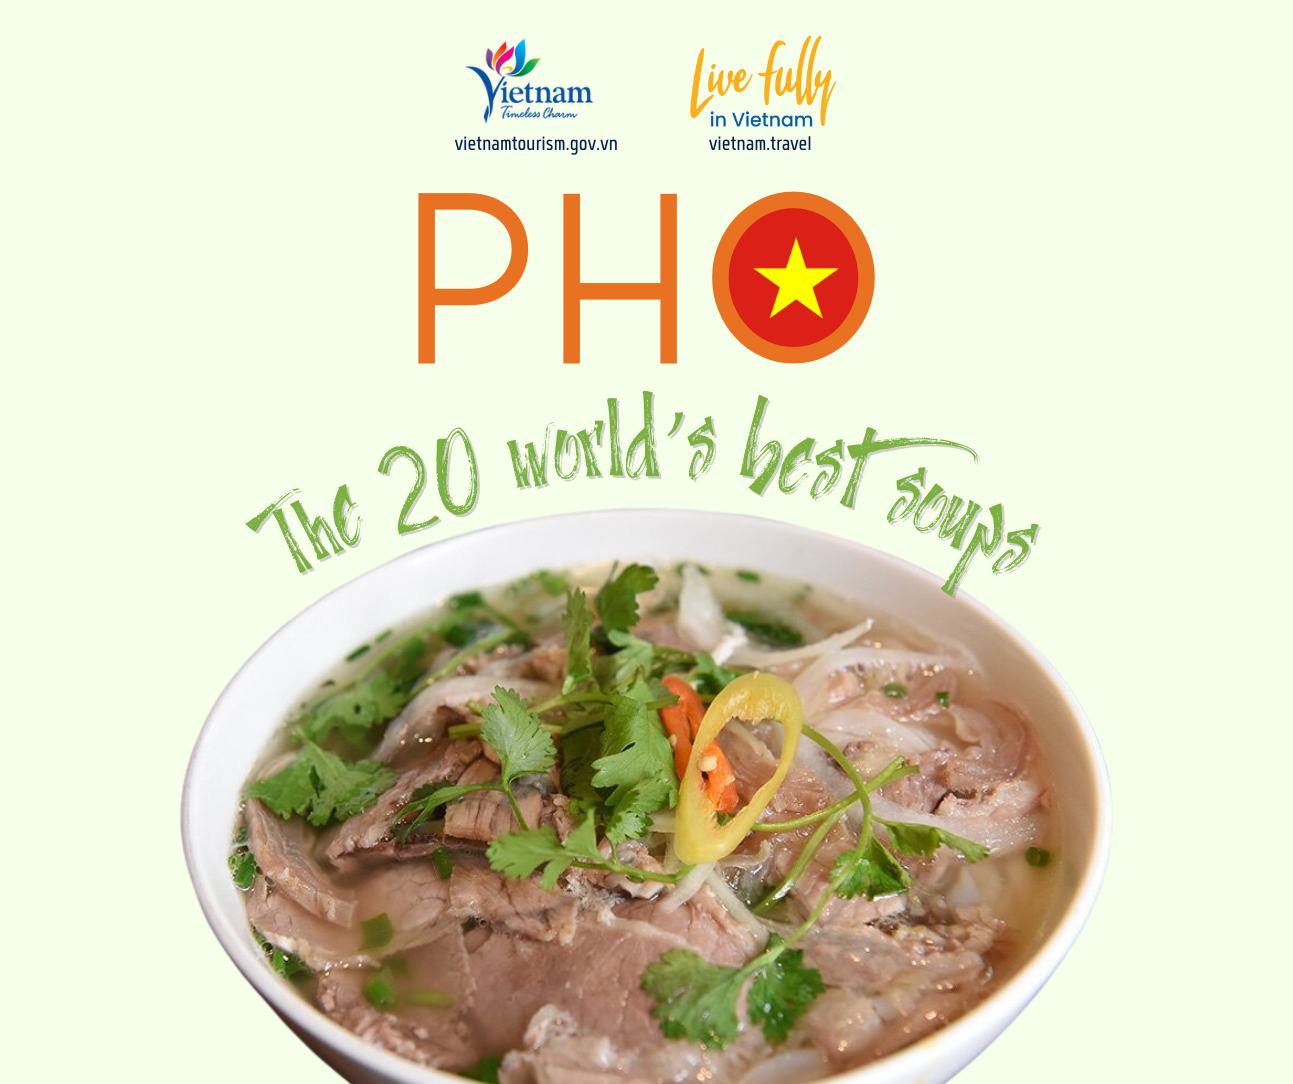 Pho: The 20 world’s best soups